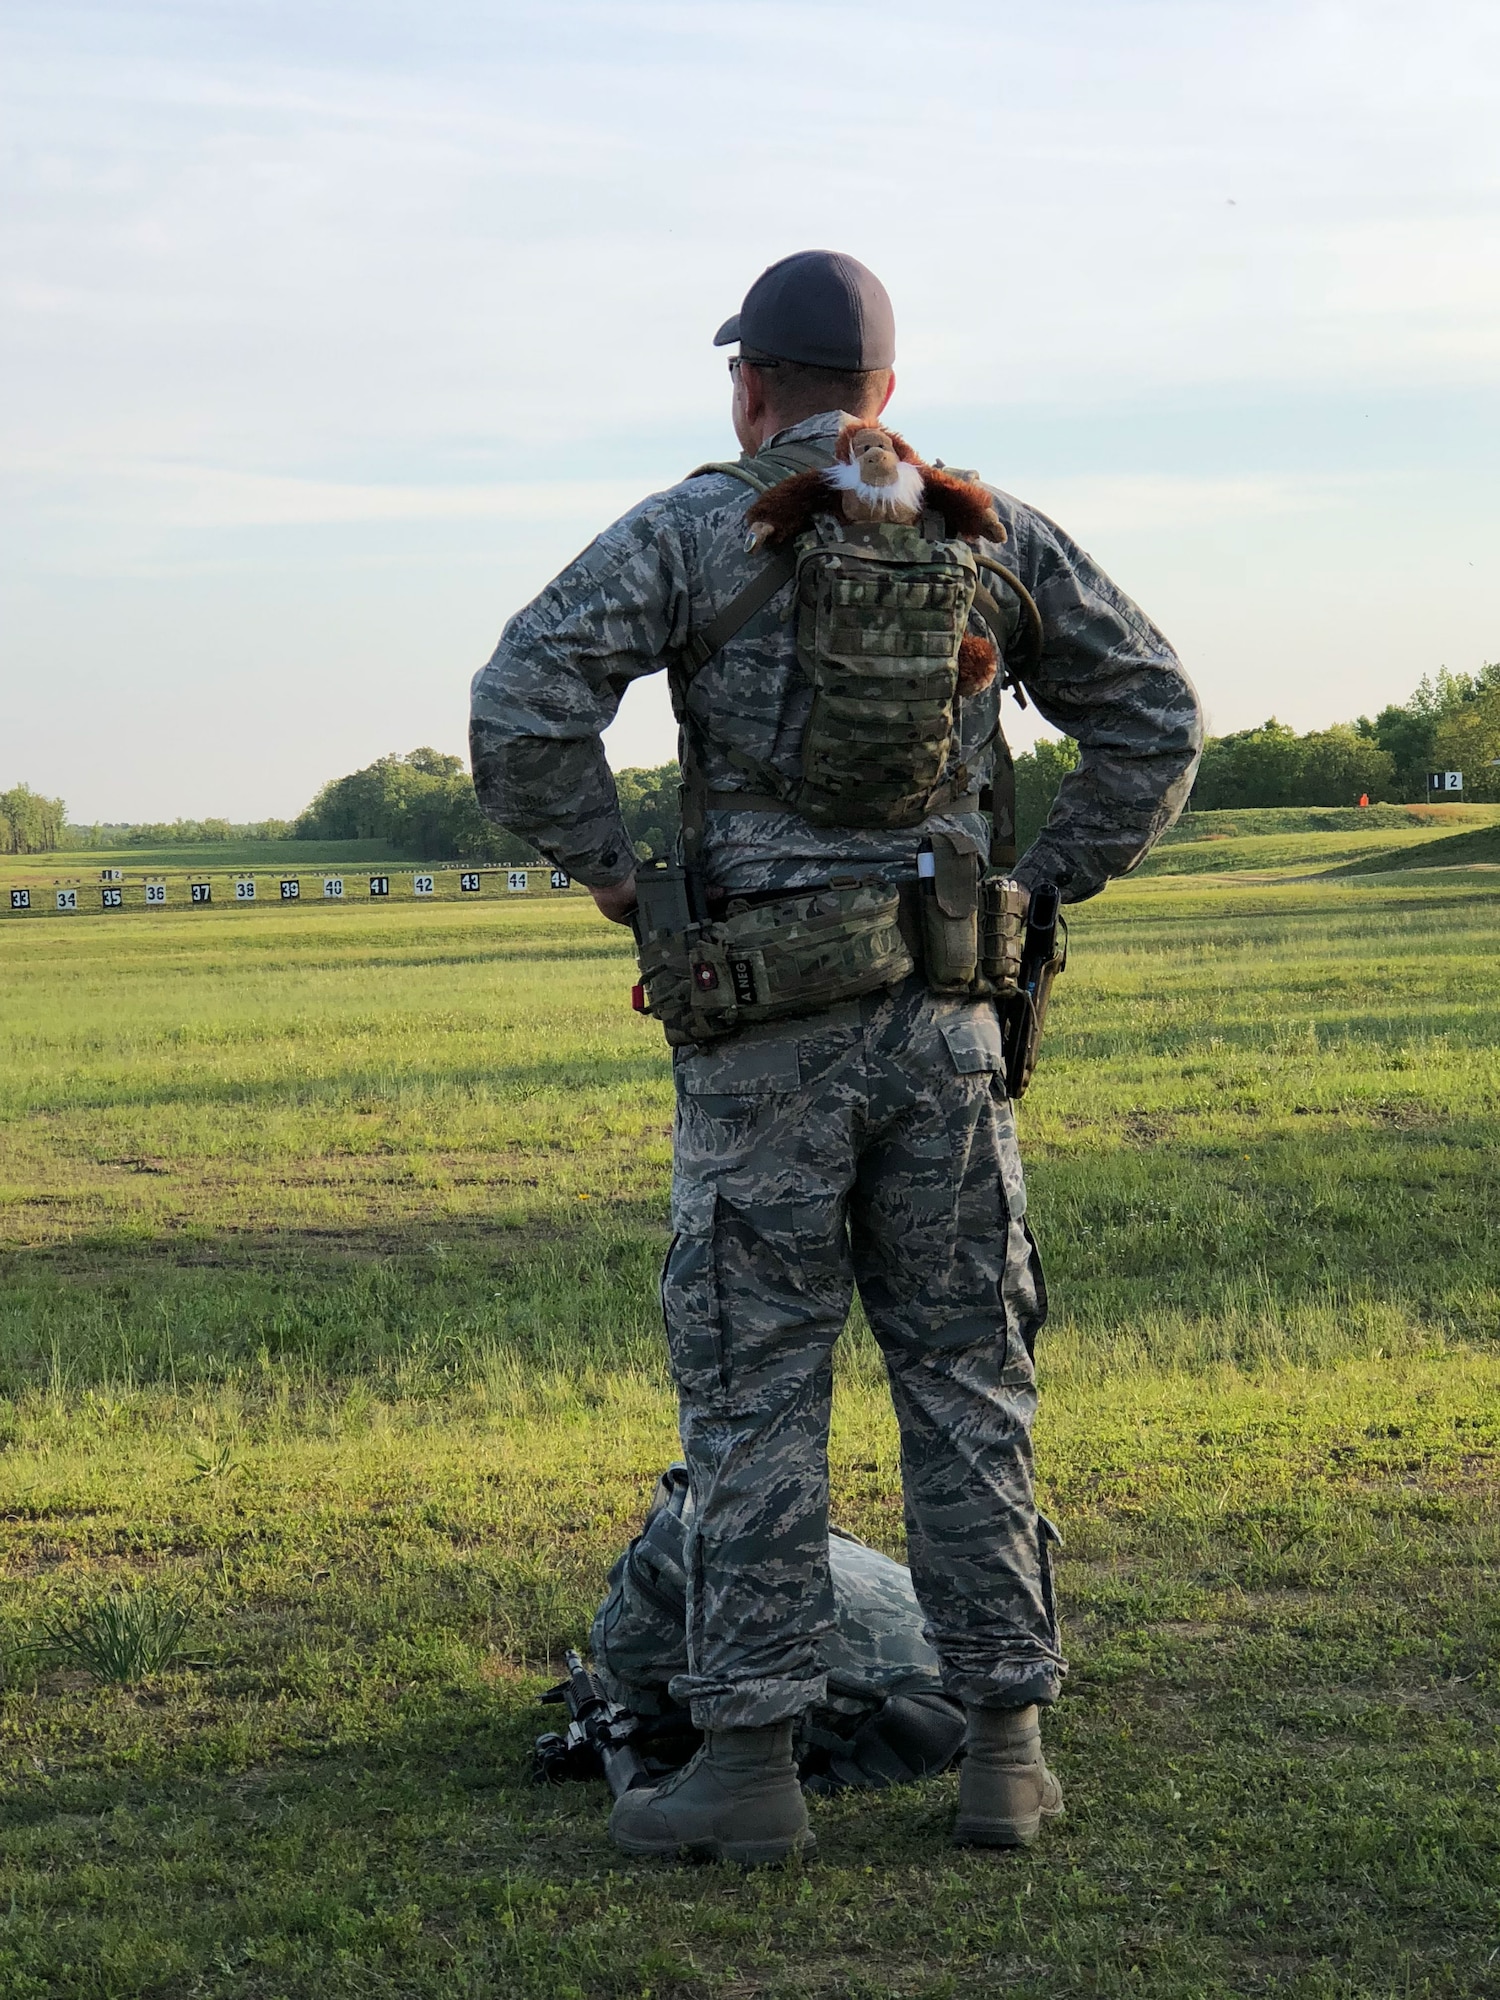 Master Sgt. Christopher Martin, 242nd Combat Communications Squadron first sergeant and team captain, enjoys an early morning sunrise with team mascot, Harry, prior to the start of the day at the  47th Annual Winston P. Wilson Championship, Robinson Maneuver Training Center, Arkansas, May 1, 2018.  The annual events, hosted by the National Guard Marksmanship Training Center April 29-May 4, 2018, offer Servicemembers from the National Guard and international community an opportunity to test marksmanship skills in a battle-focused environment. (U.S. Air National Guard photo by Staff Sgt. Hope Funderburk)